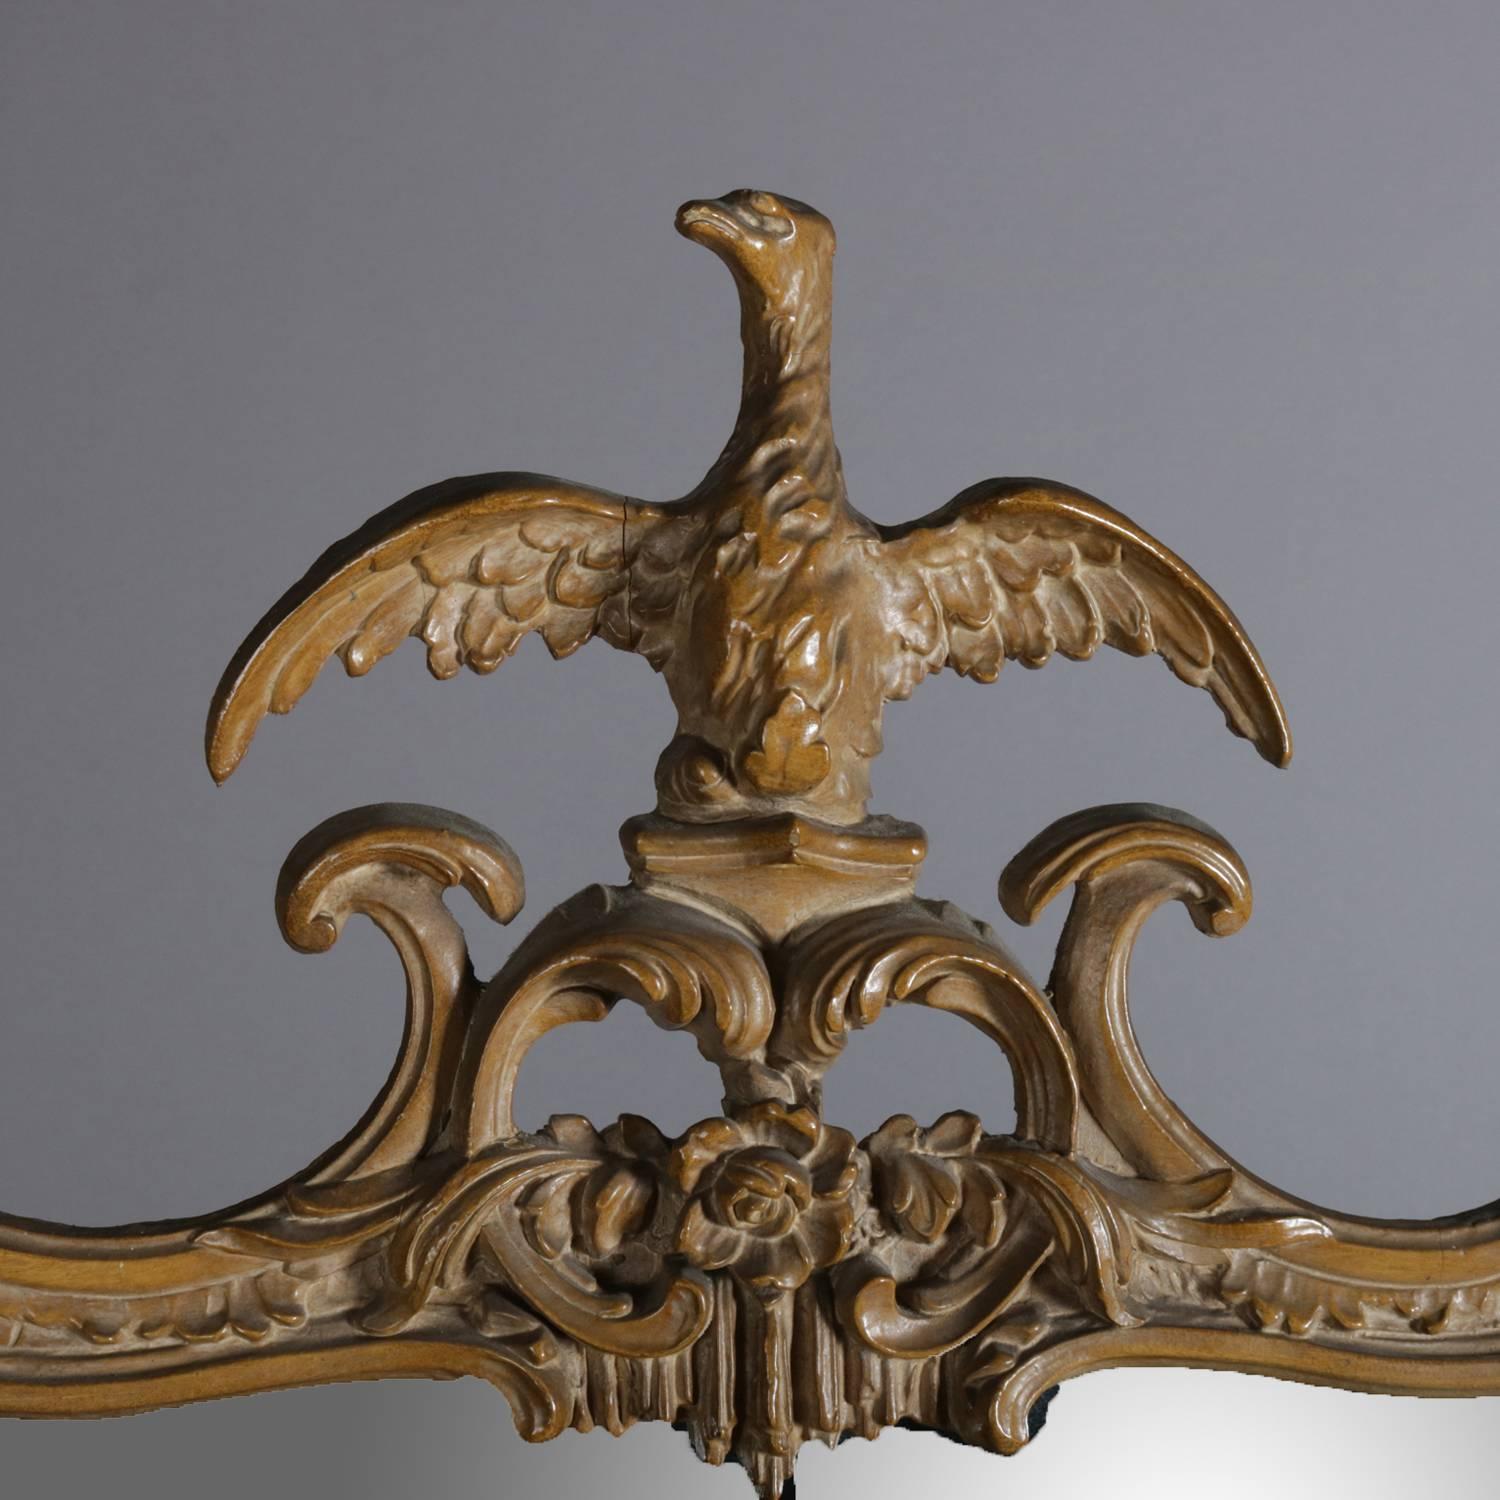 Federal style figural wall mirror features carved and painted frame with spread eagle phoenix on pierced foliate form crest; frame with scroll, floral and foliate form; 20th century

Measures: 45